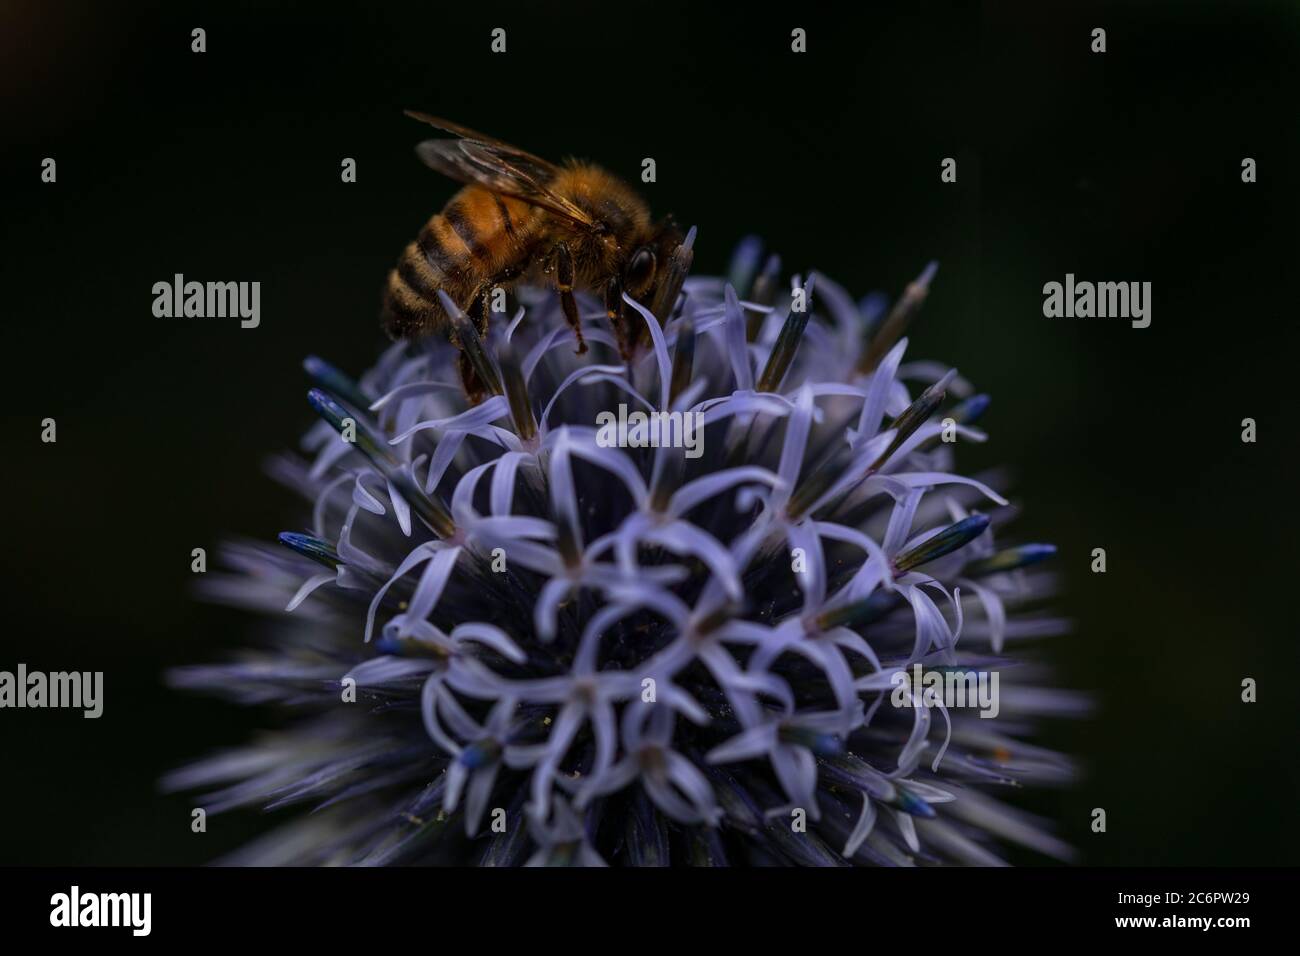 Busy as a Bee. Macro of a Honey Bee on a blue Globe Thistle. Dark bokeh background contrasting with the illuminated subjects. Stock Photo